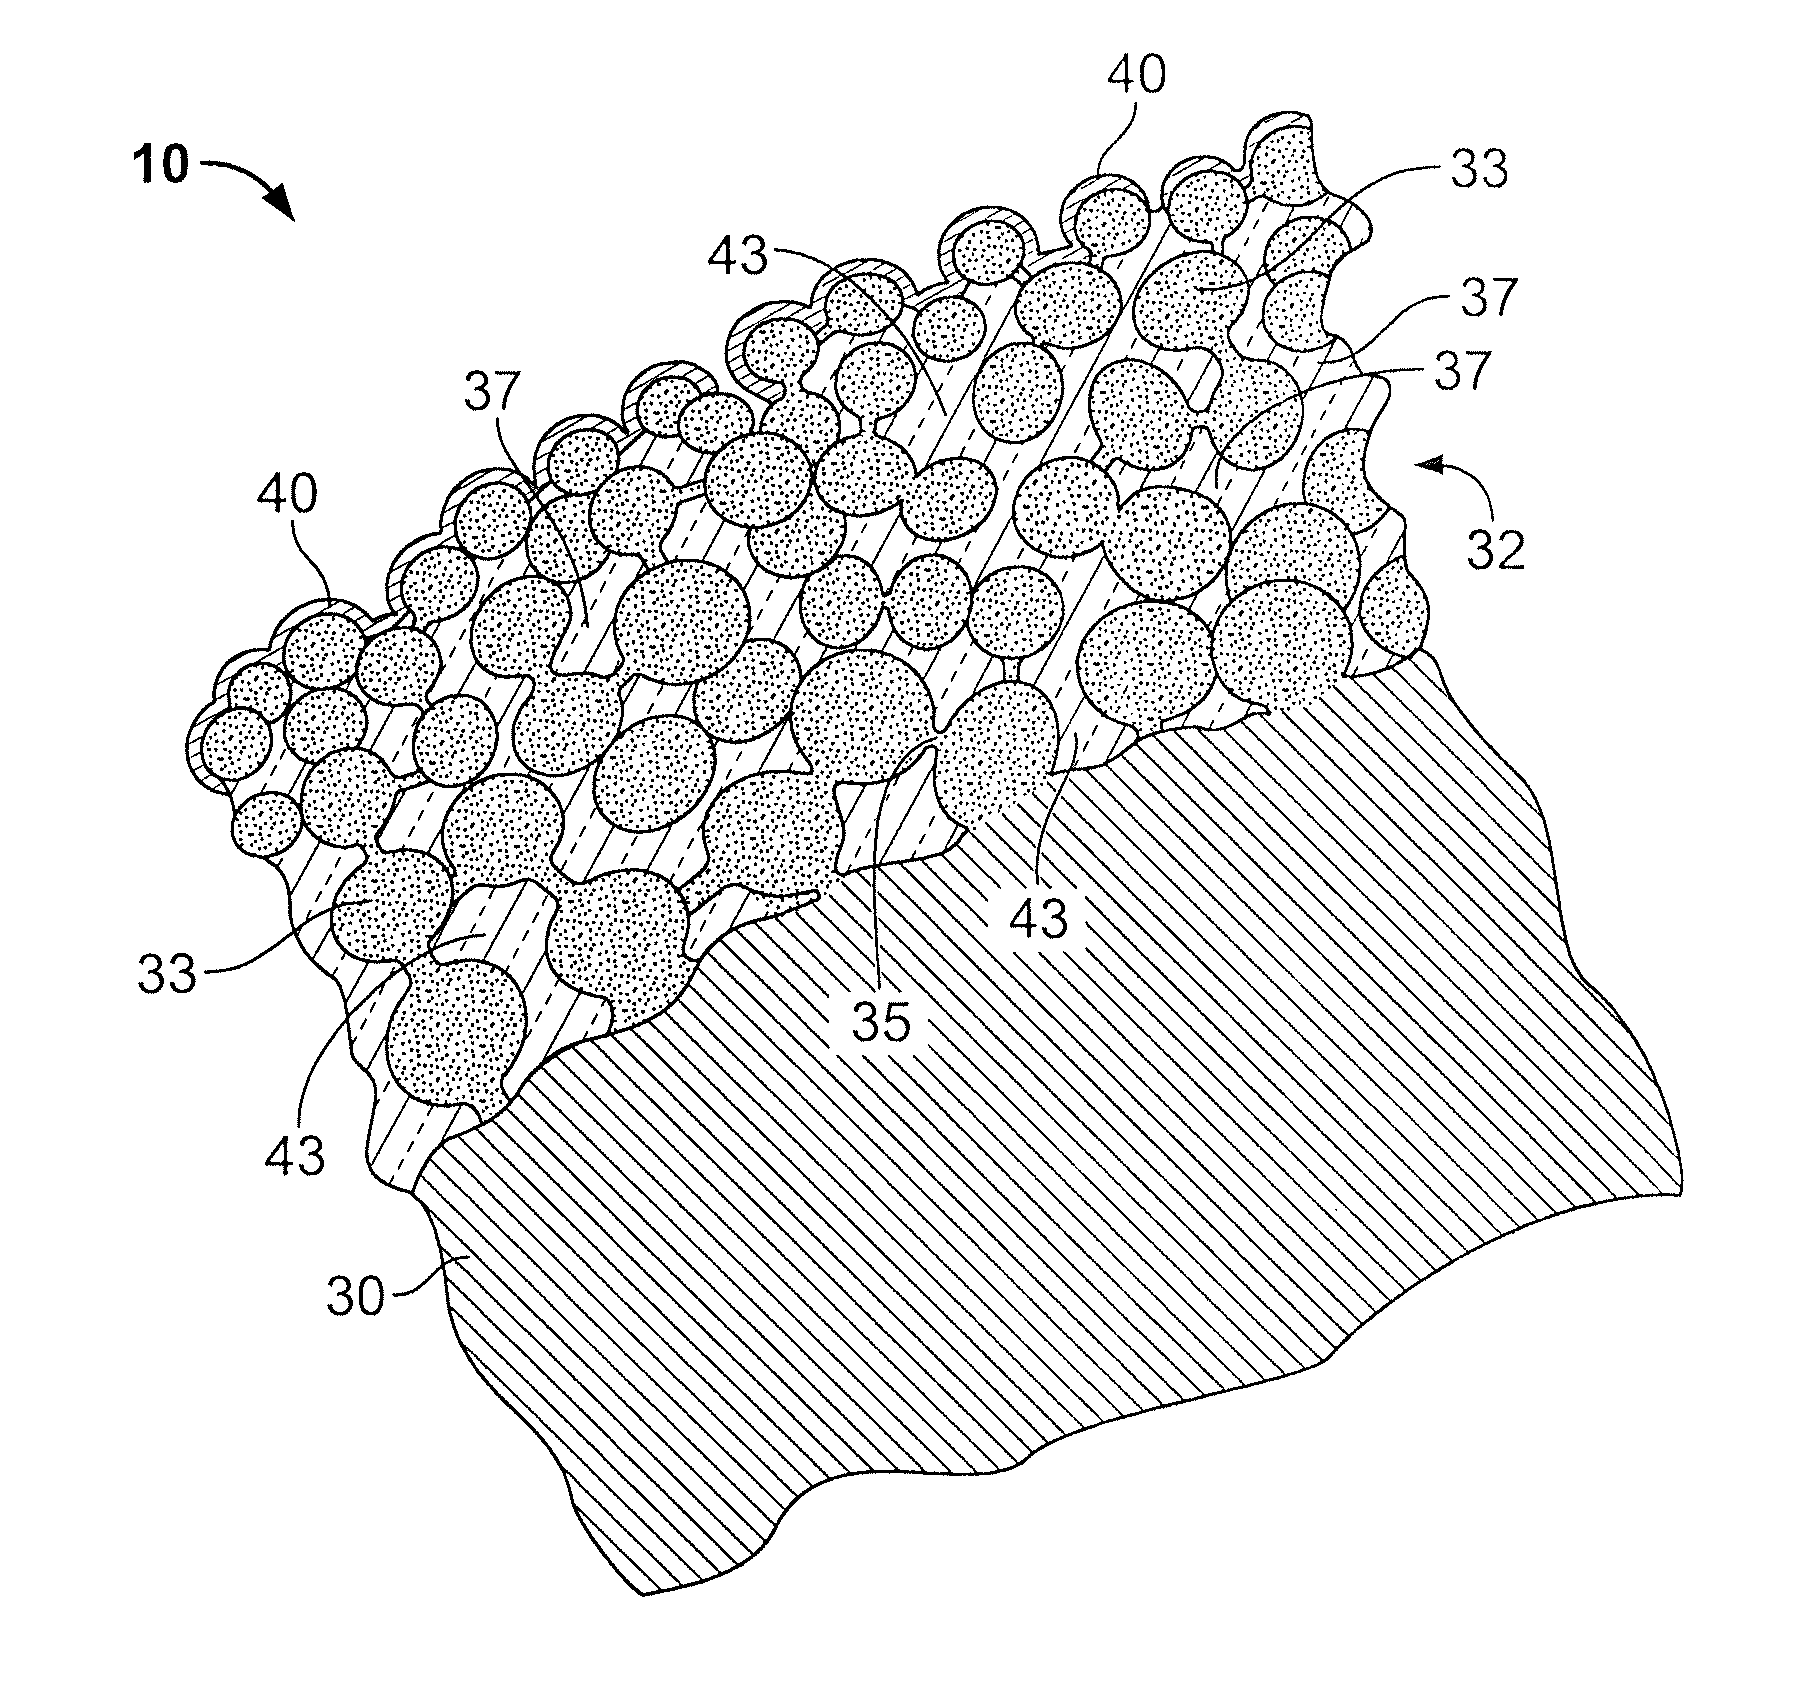 Drug-releasing stent with ceramic-containing layer